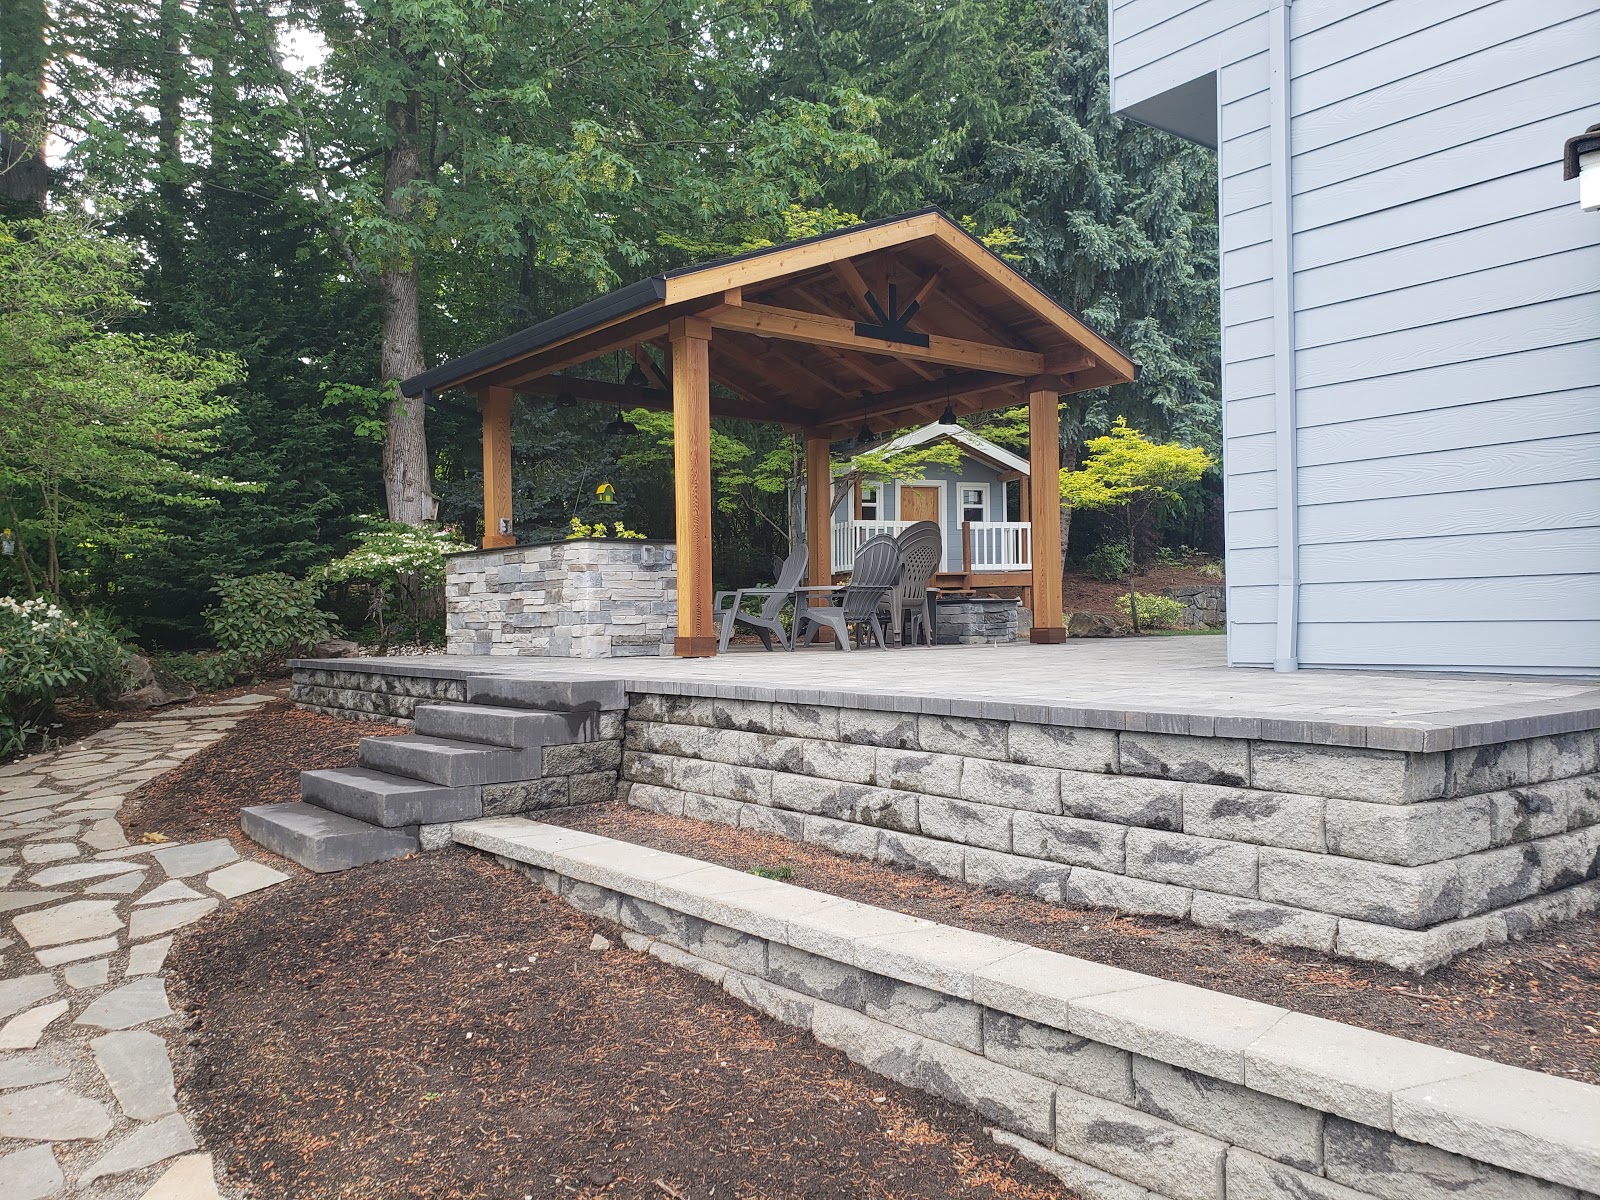 Stone blocks provide both a retaining wall and foundational support for this patio. The retaining wall has been capped with Belgard Diamond wall cap and the steps leading up to the patio are a Belgard Landings© Step unit.